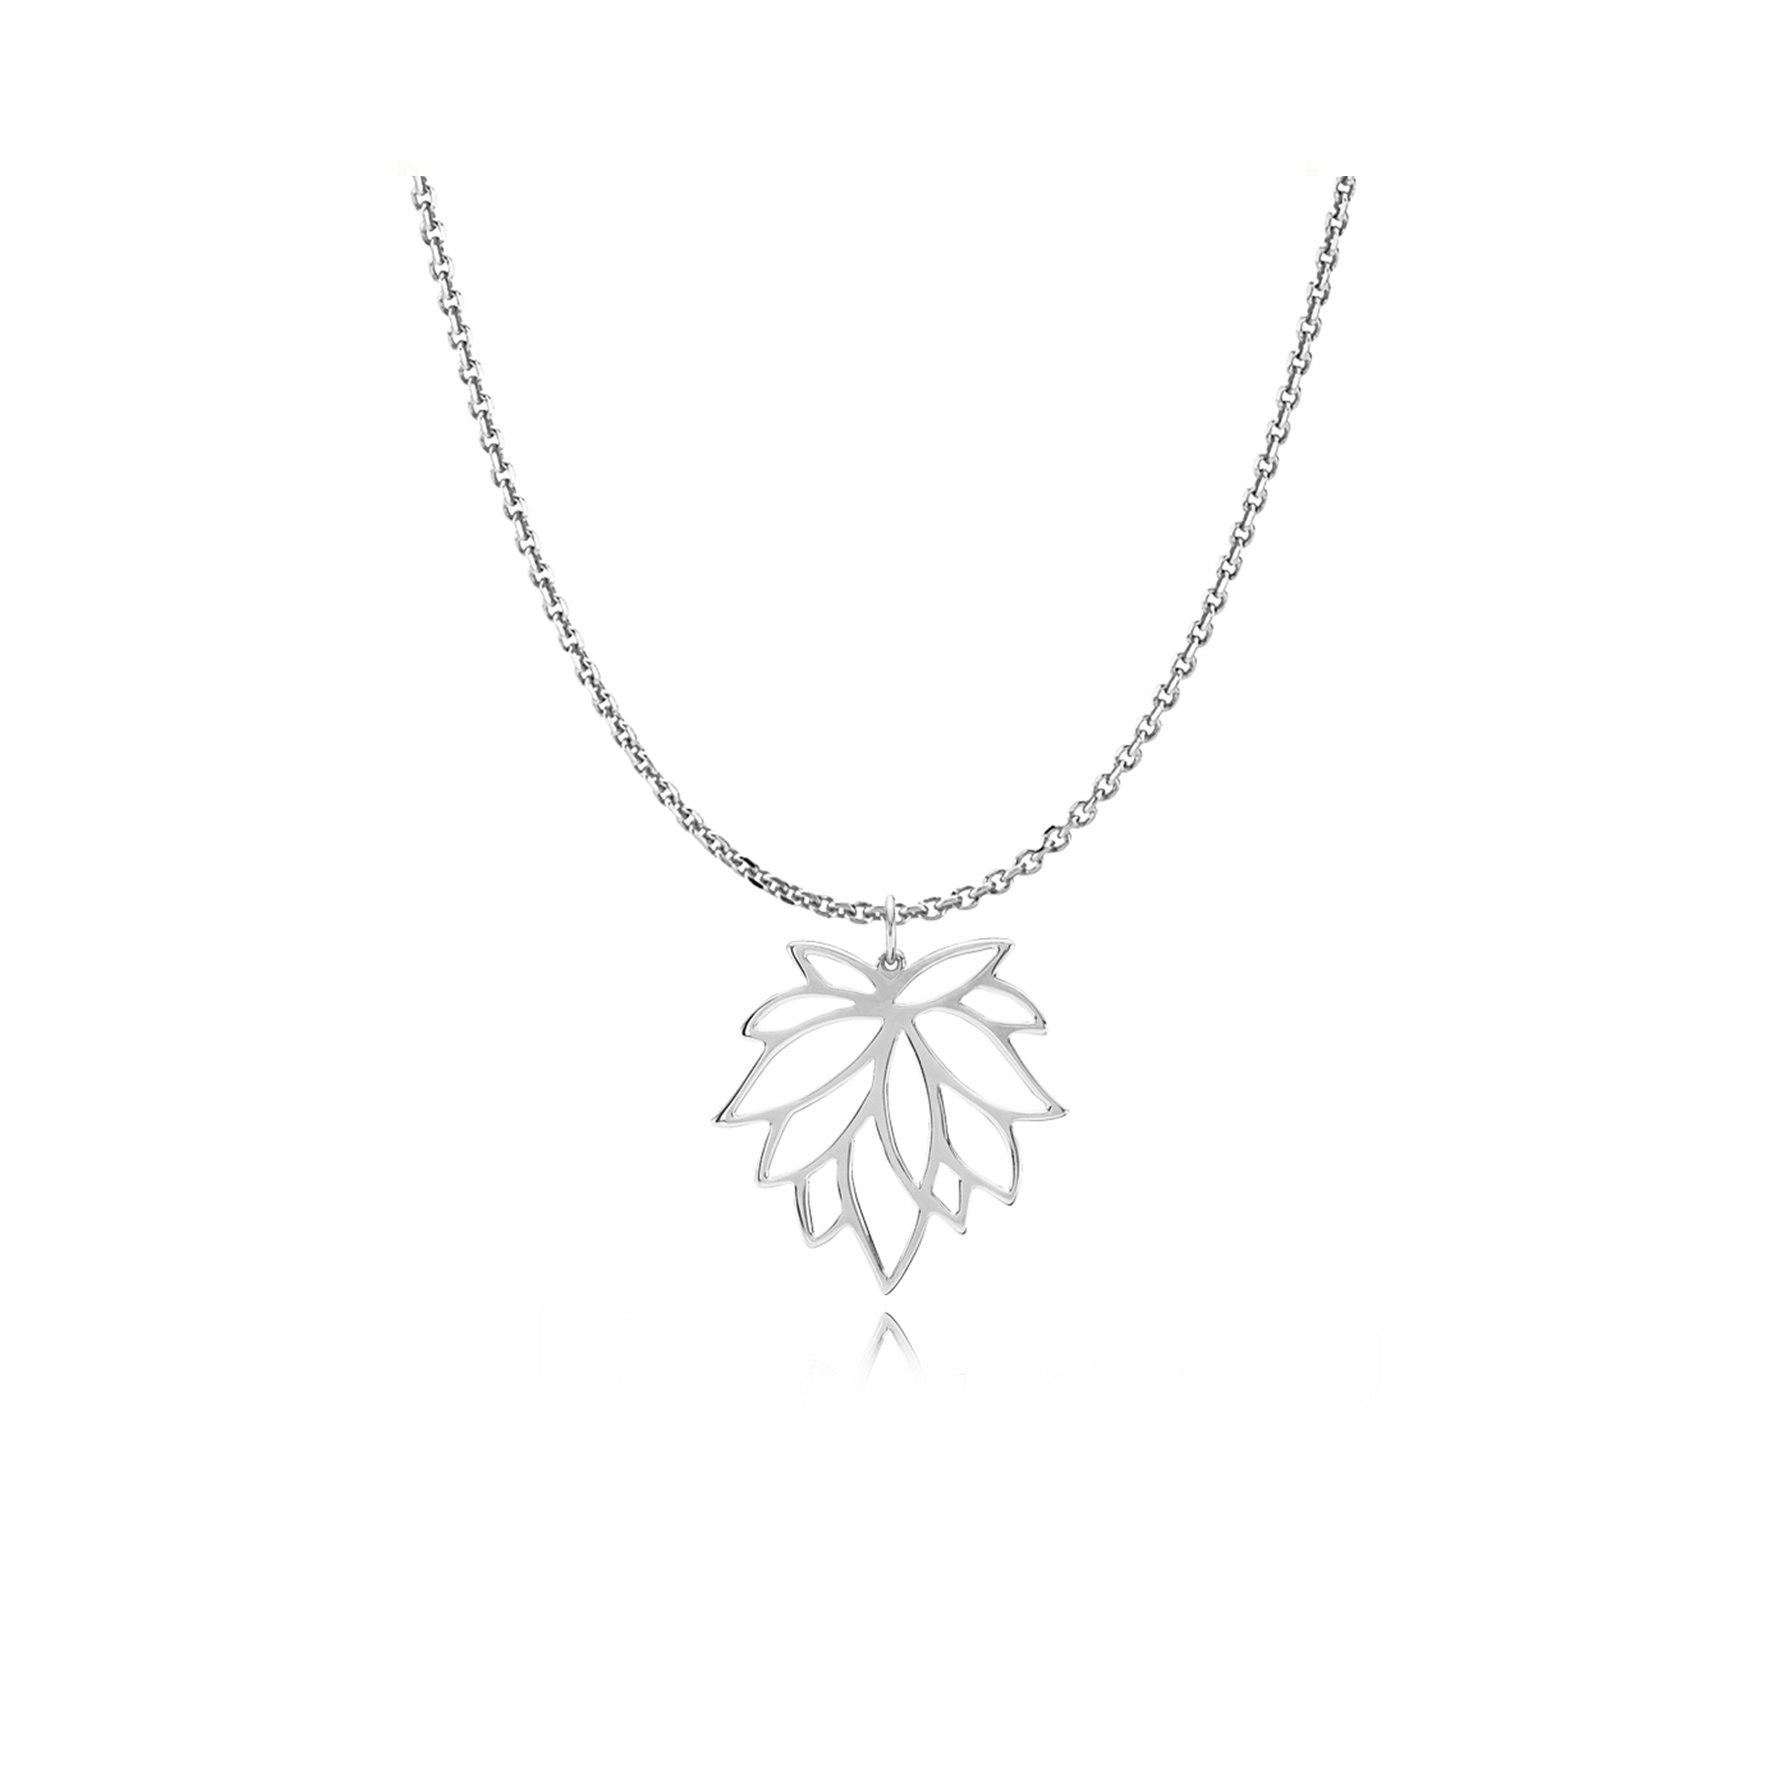 Mie Moltke Pendant Necklace from Izabel Camille in Silver Sterling 925